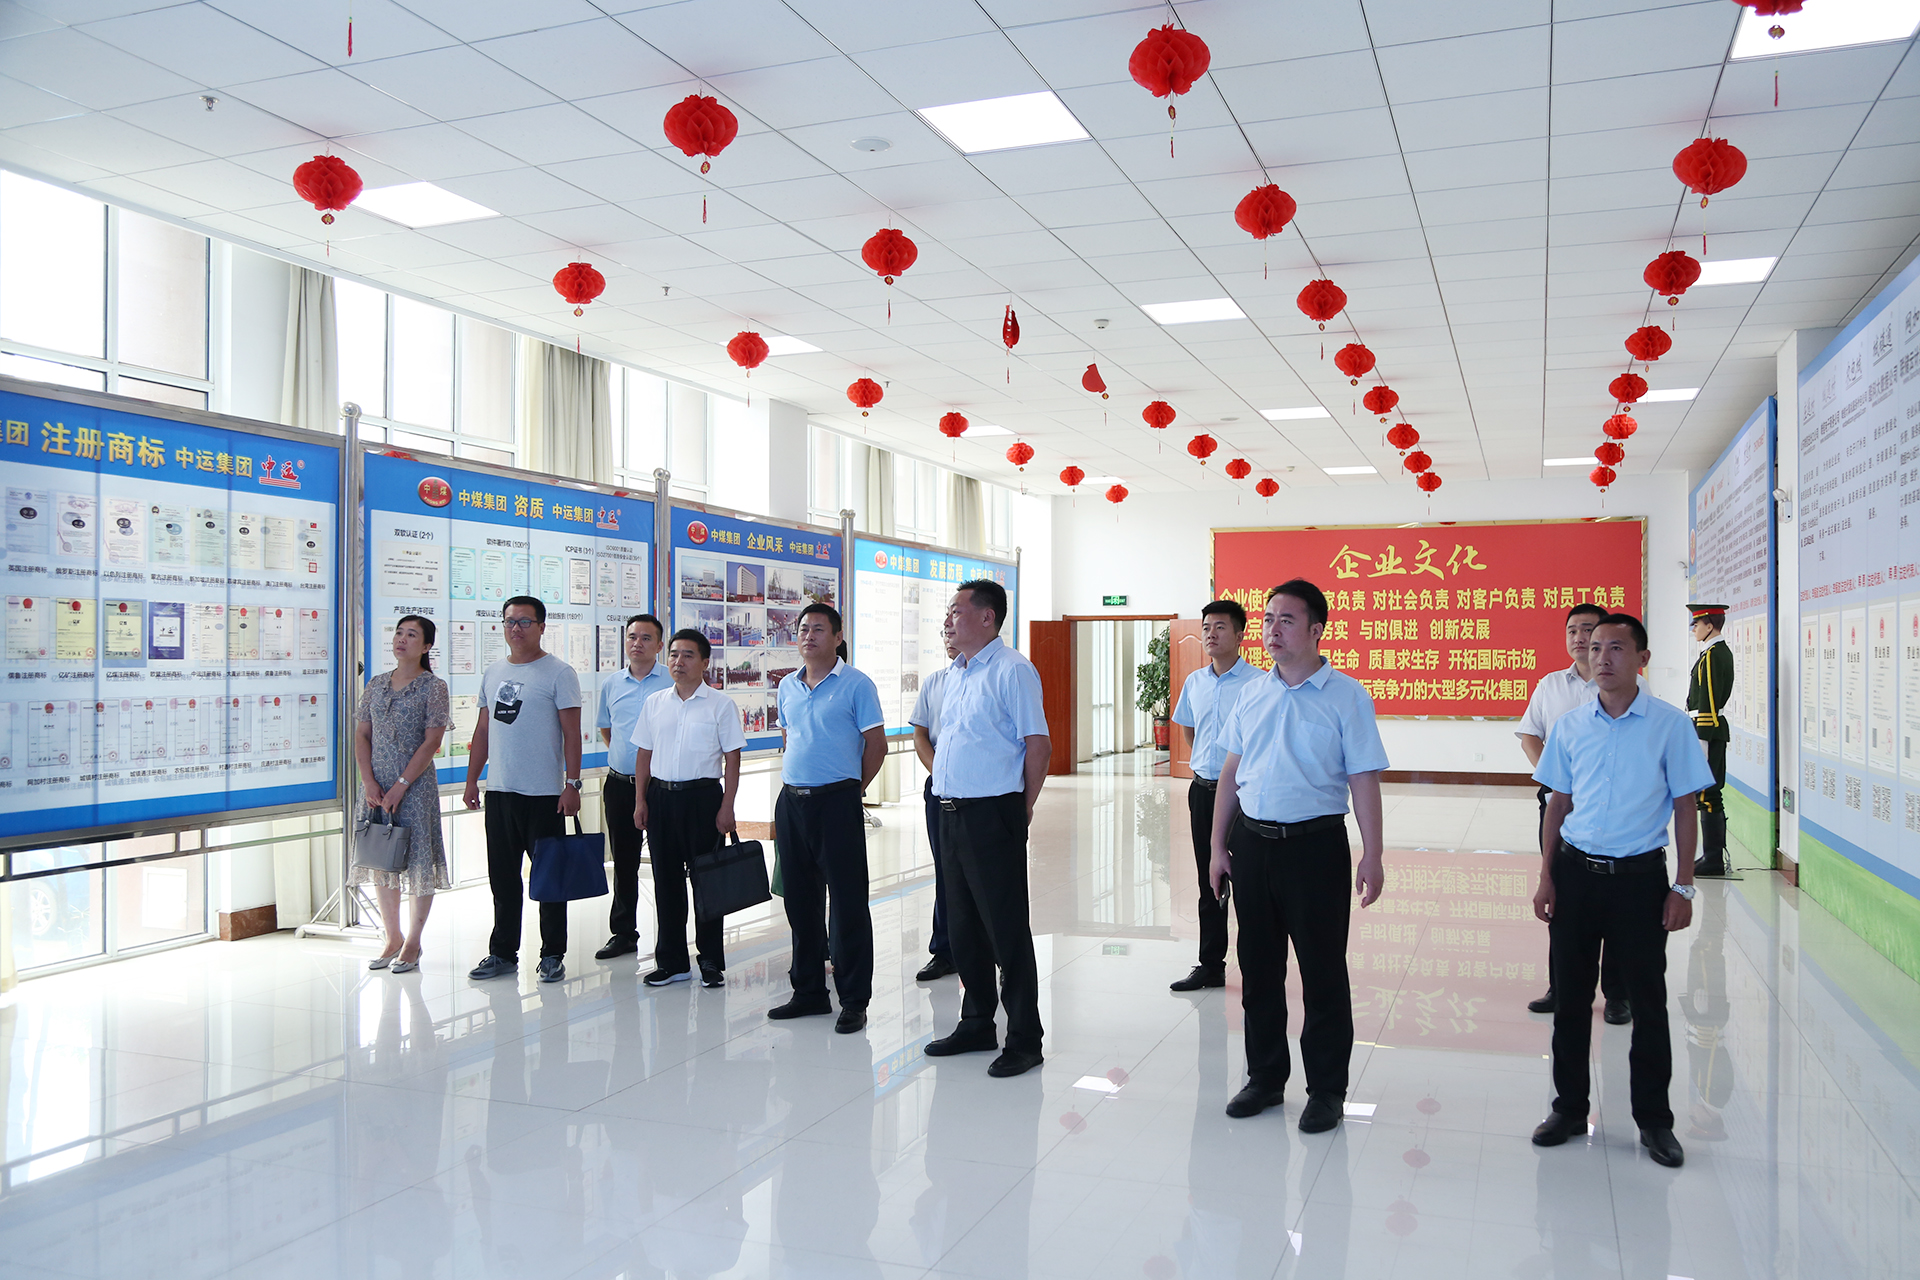 Warmly Welcome The Leaders Of The Jining Labor And Personnel Dispute Arbitration Institute To Visit China Coal Group